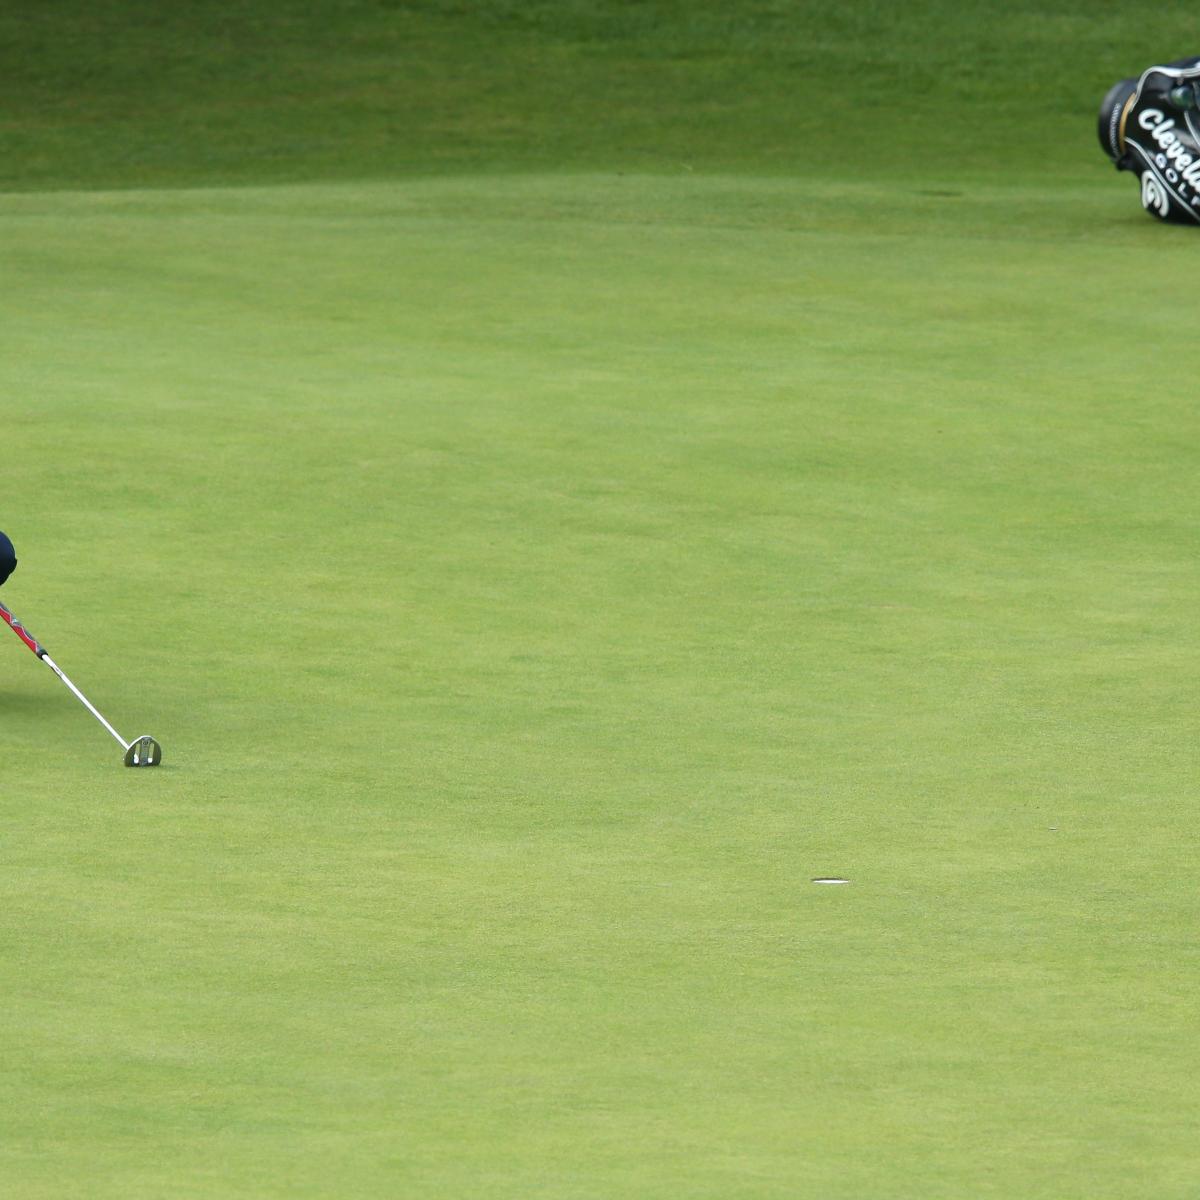 British Open Standings 2012 Most Shocking Results from Royal Lytham